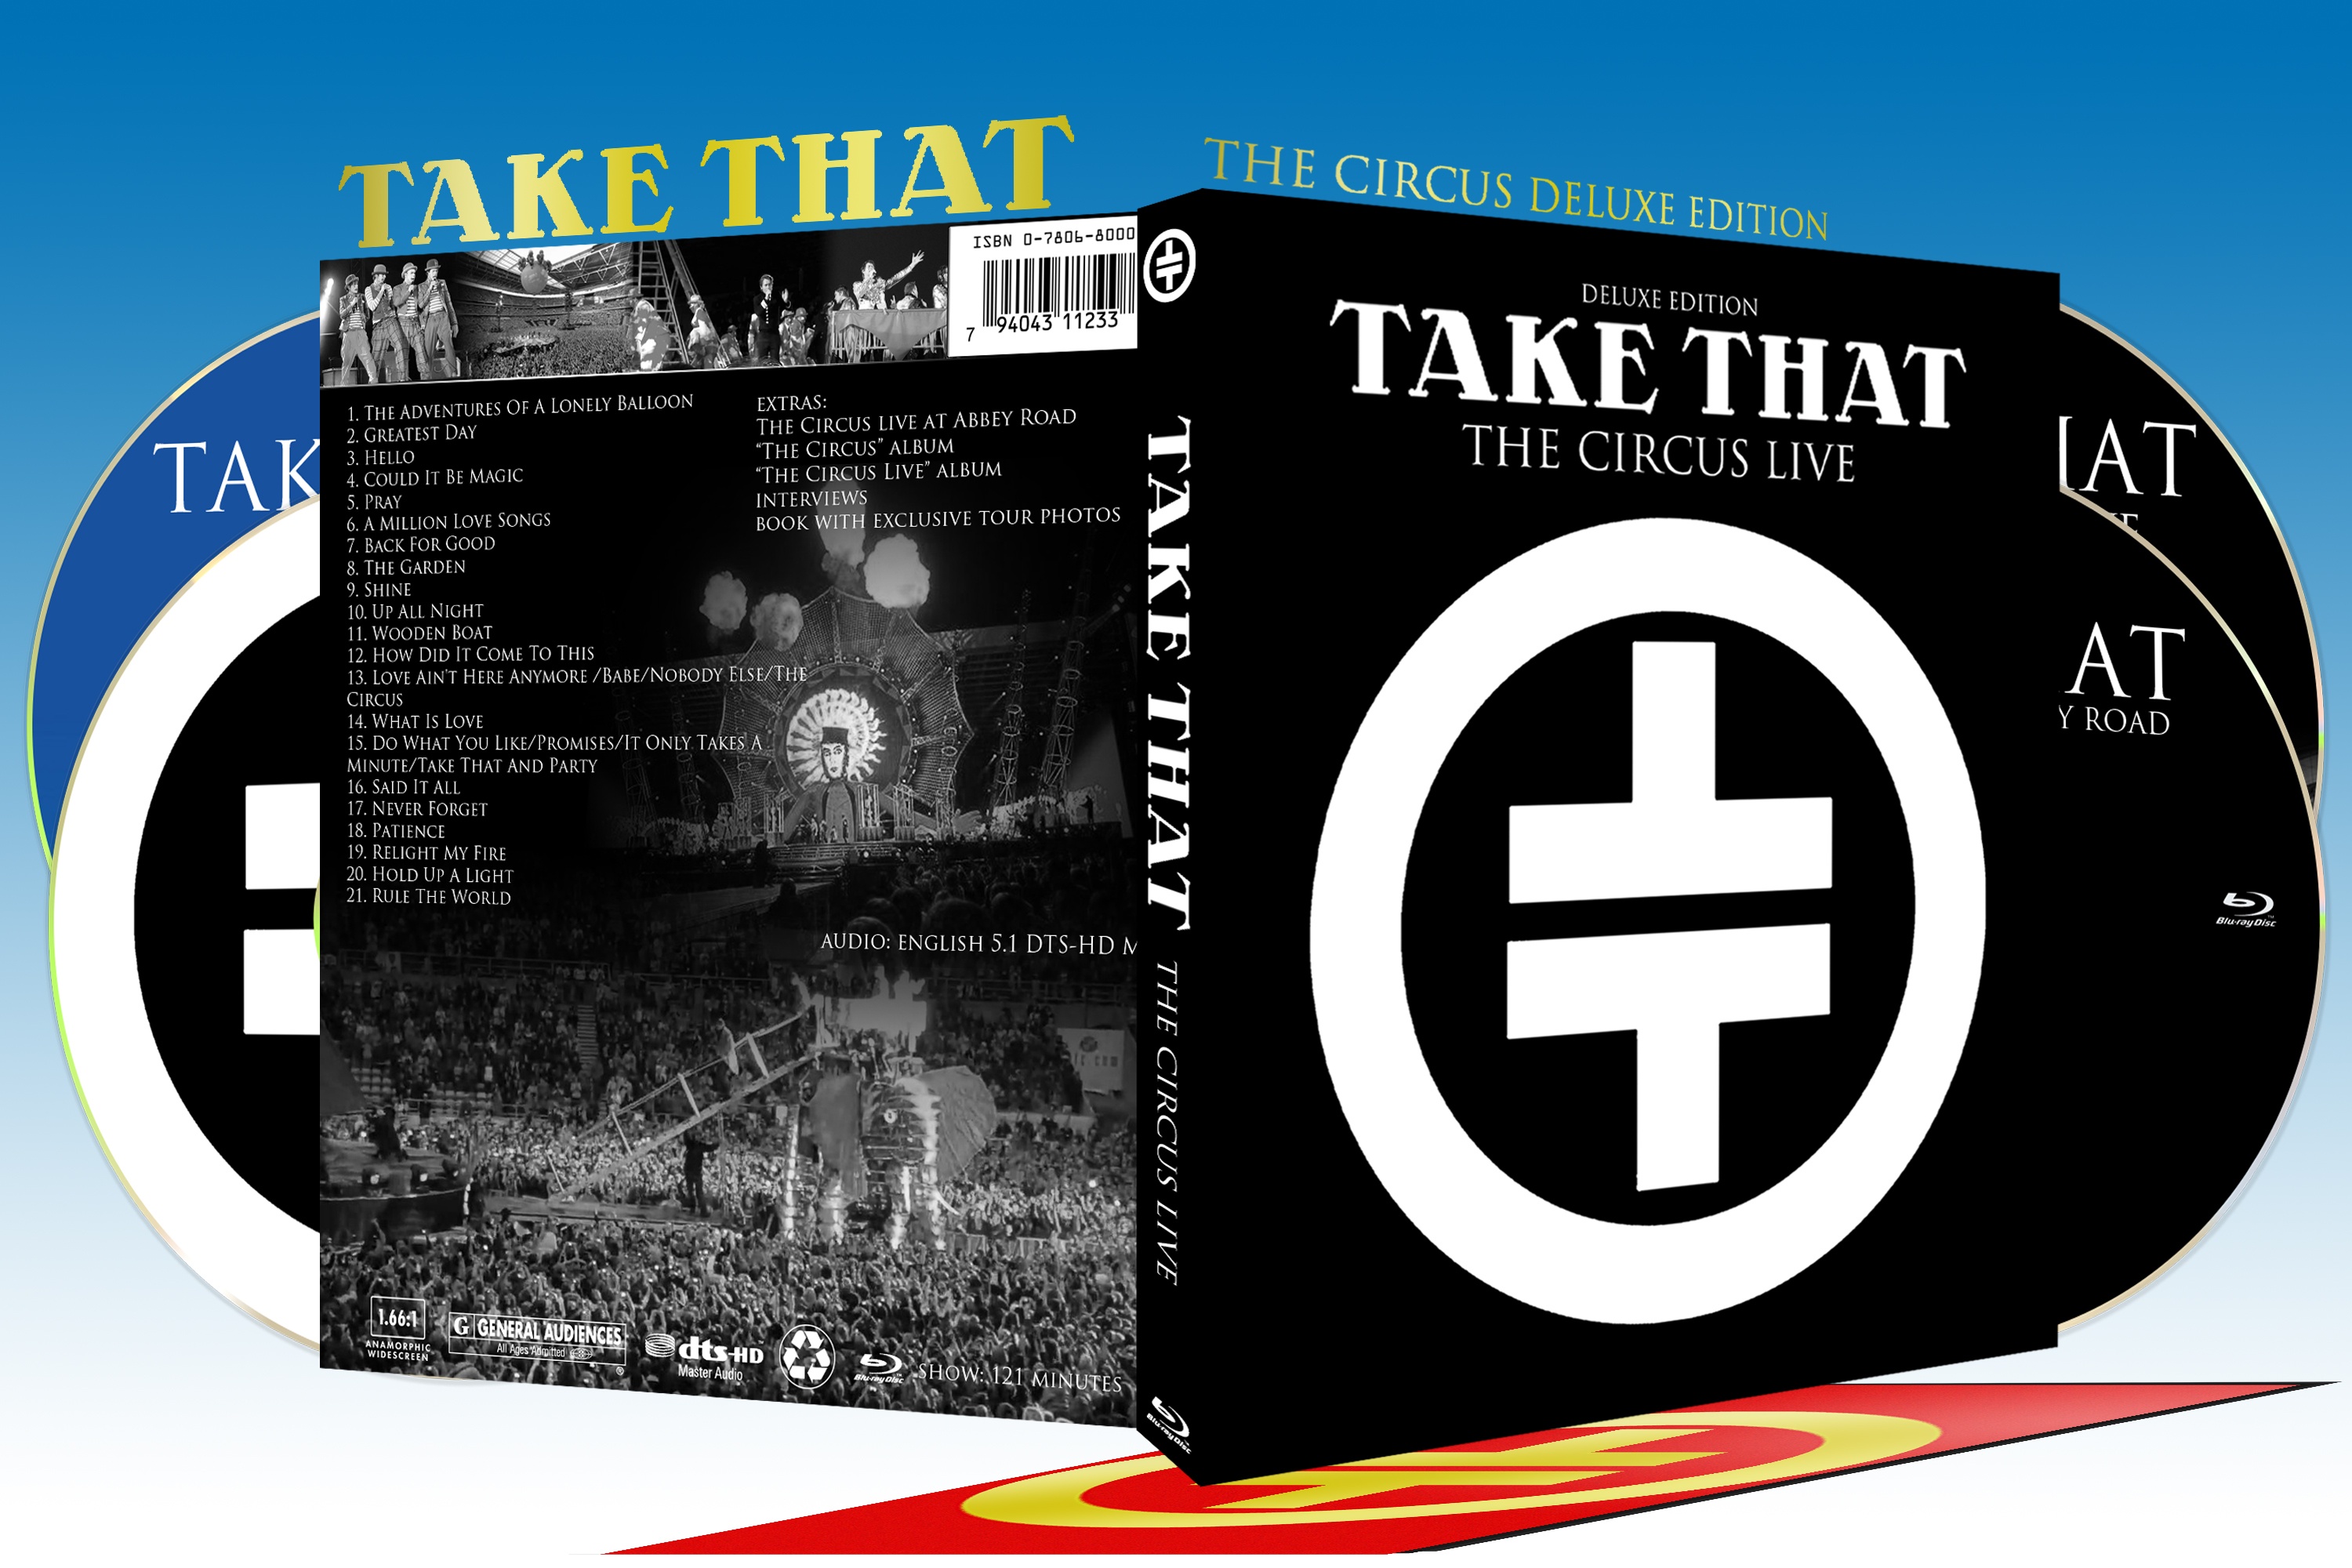 Take That - The Circus Live box cover